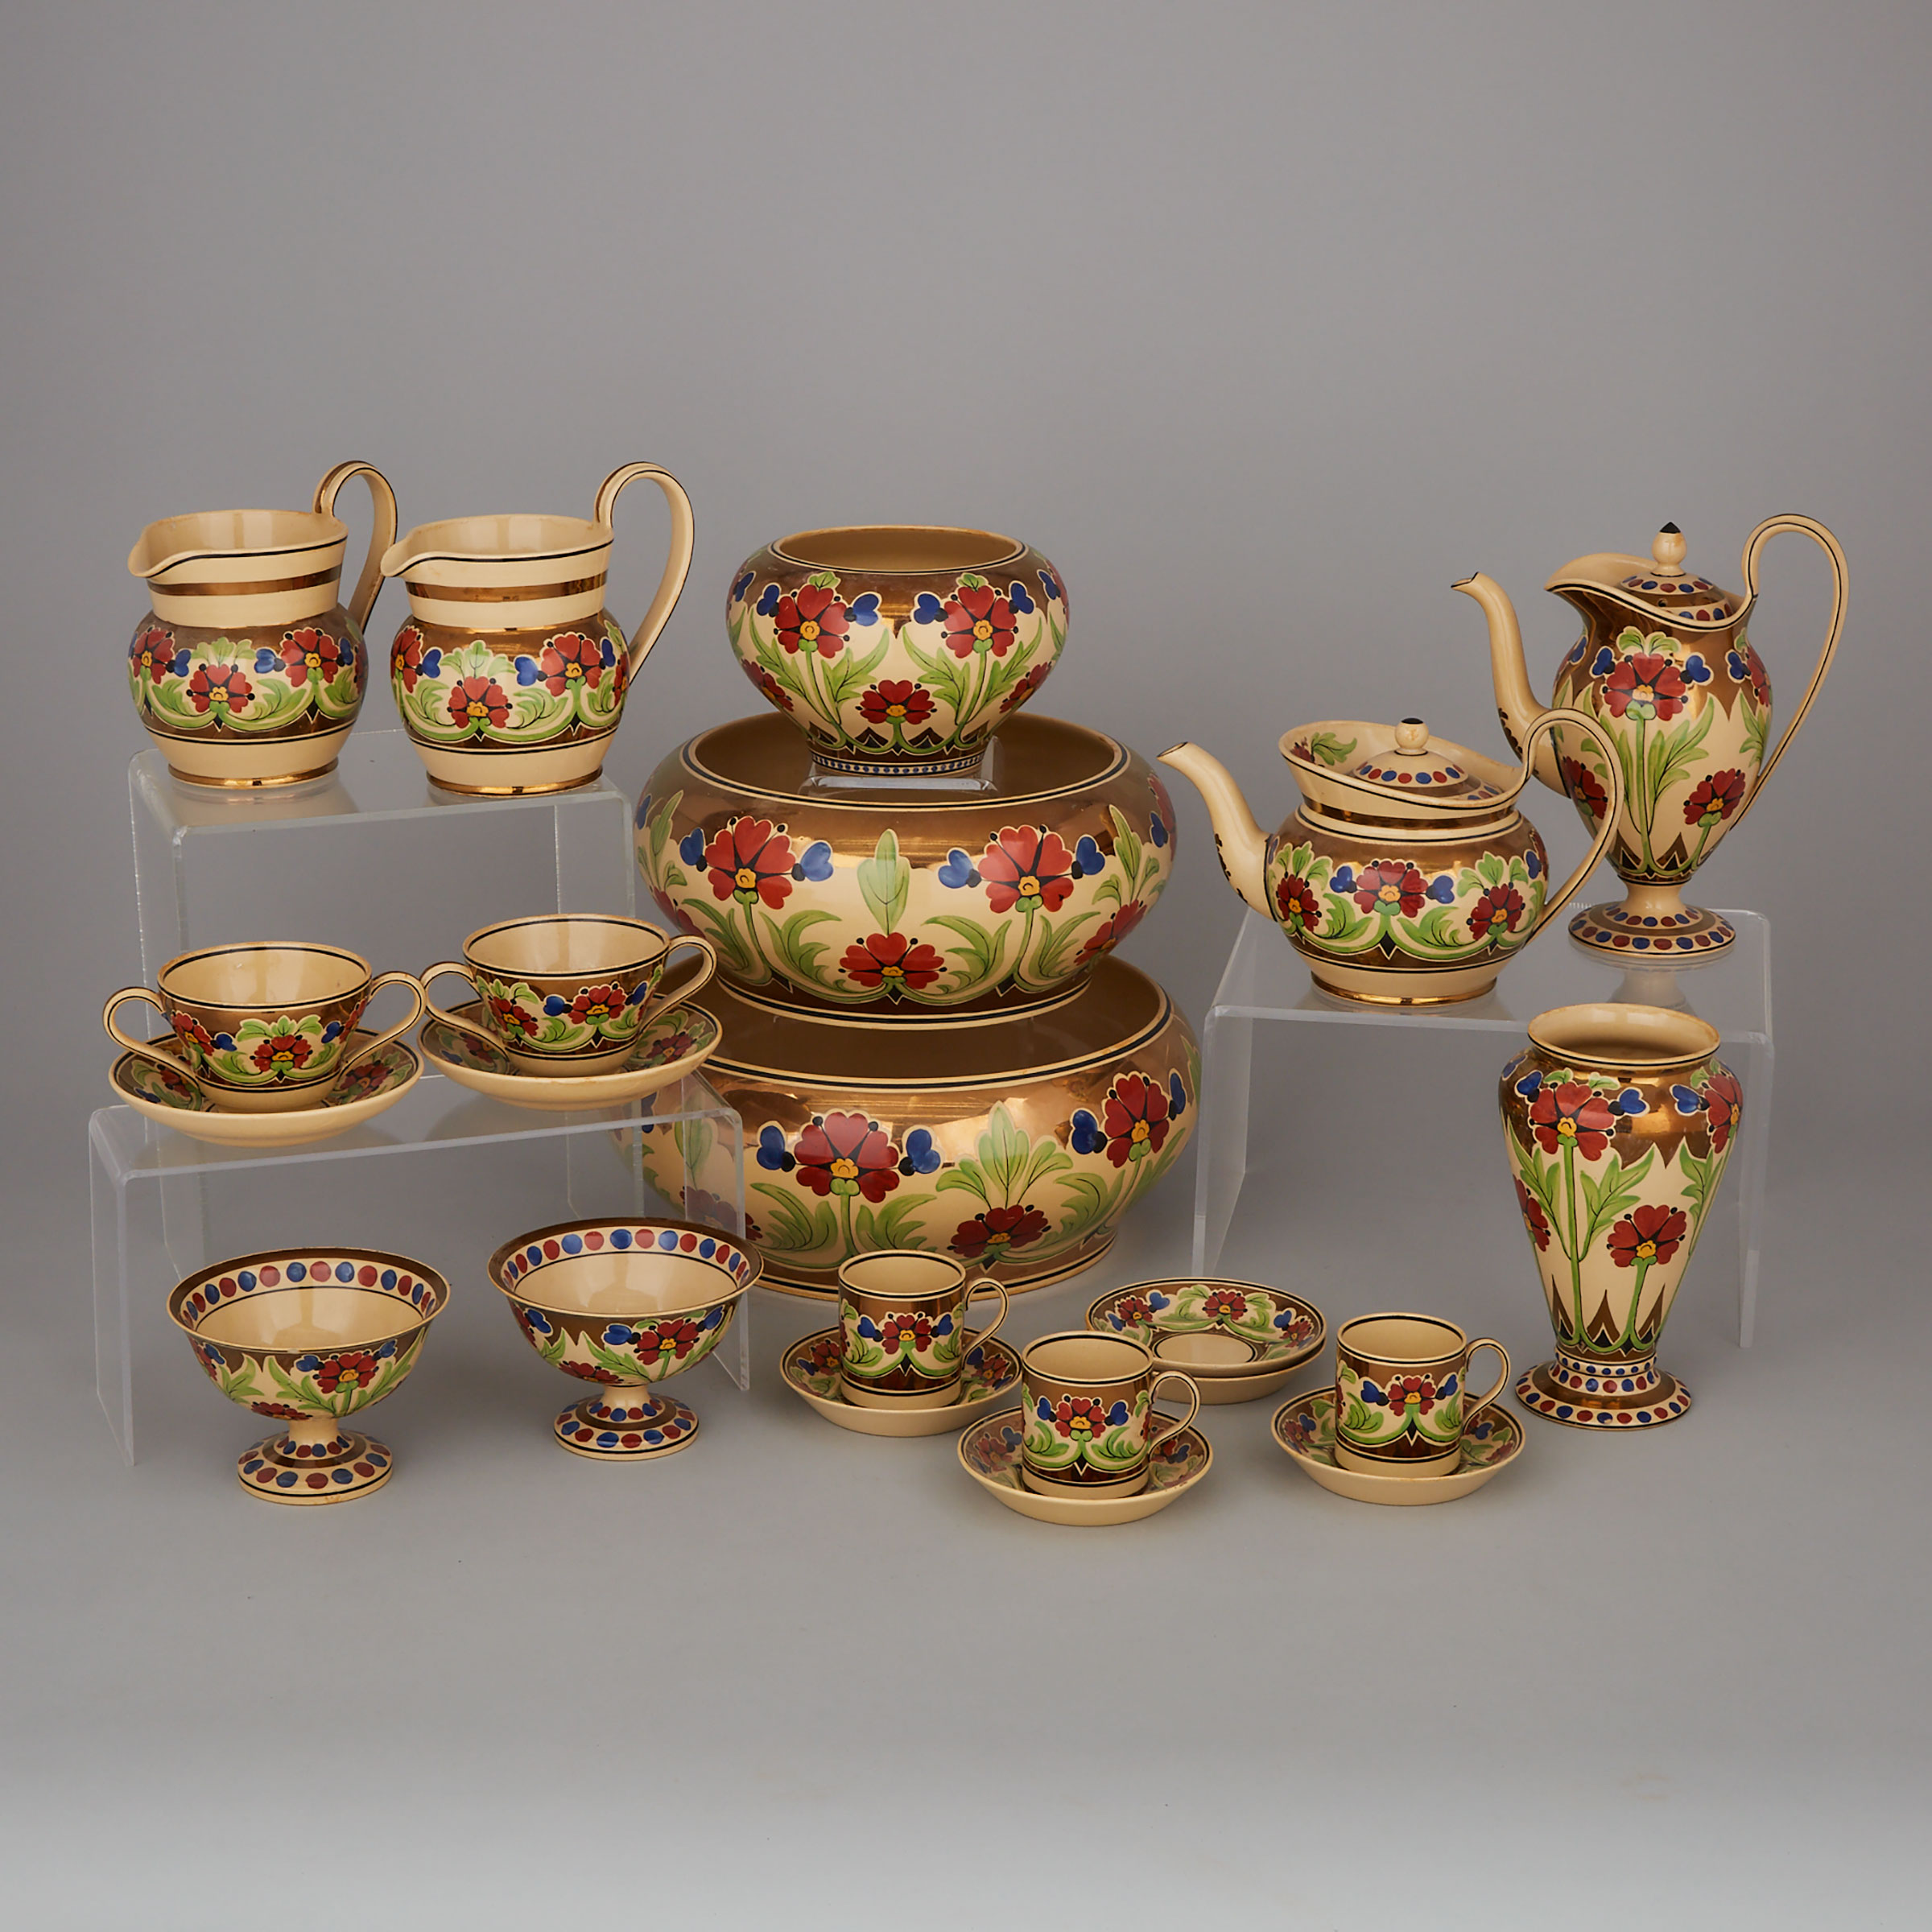 Wedgwood Copper Lustre and Floral Decorated Service, John Goodwin, c.1930